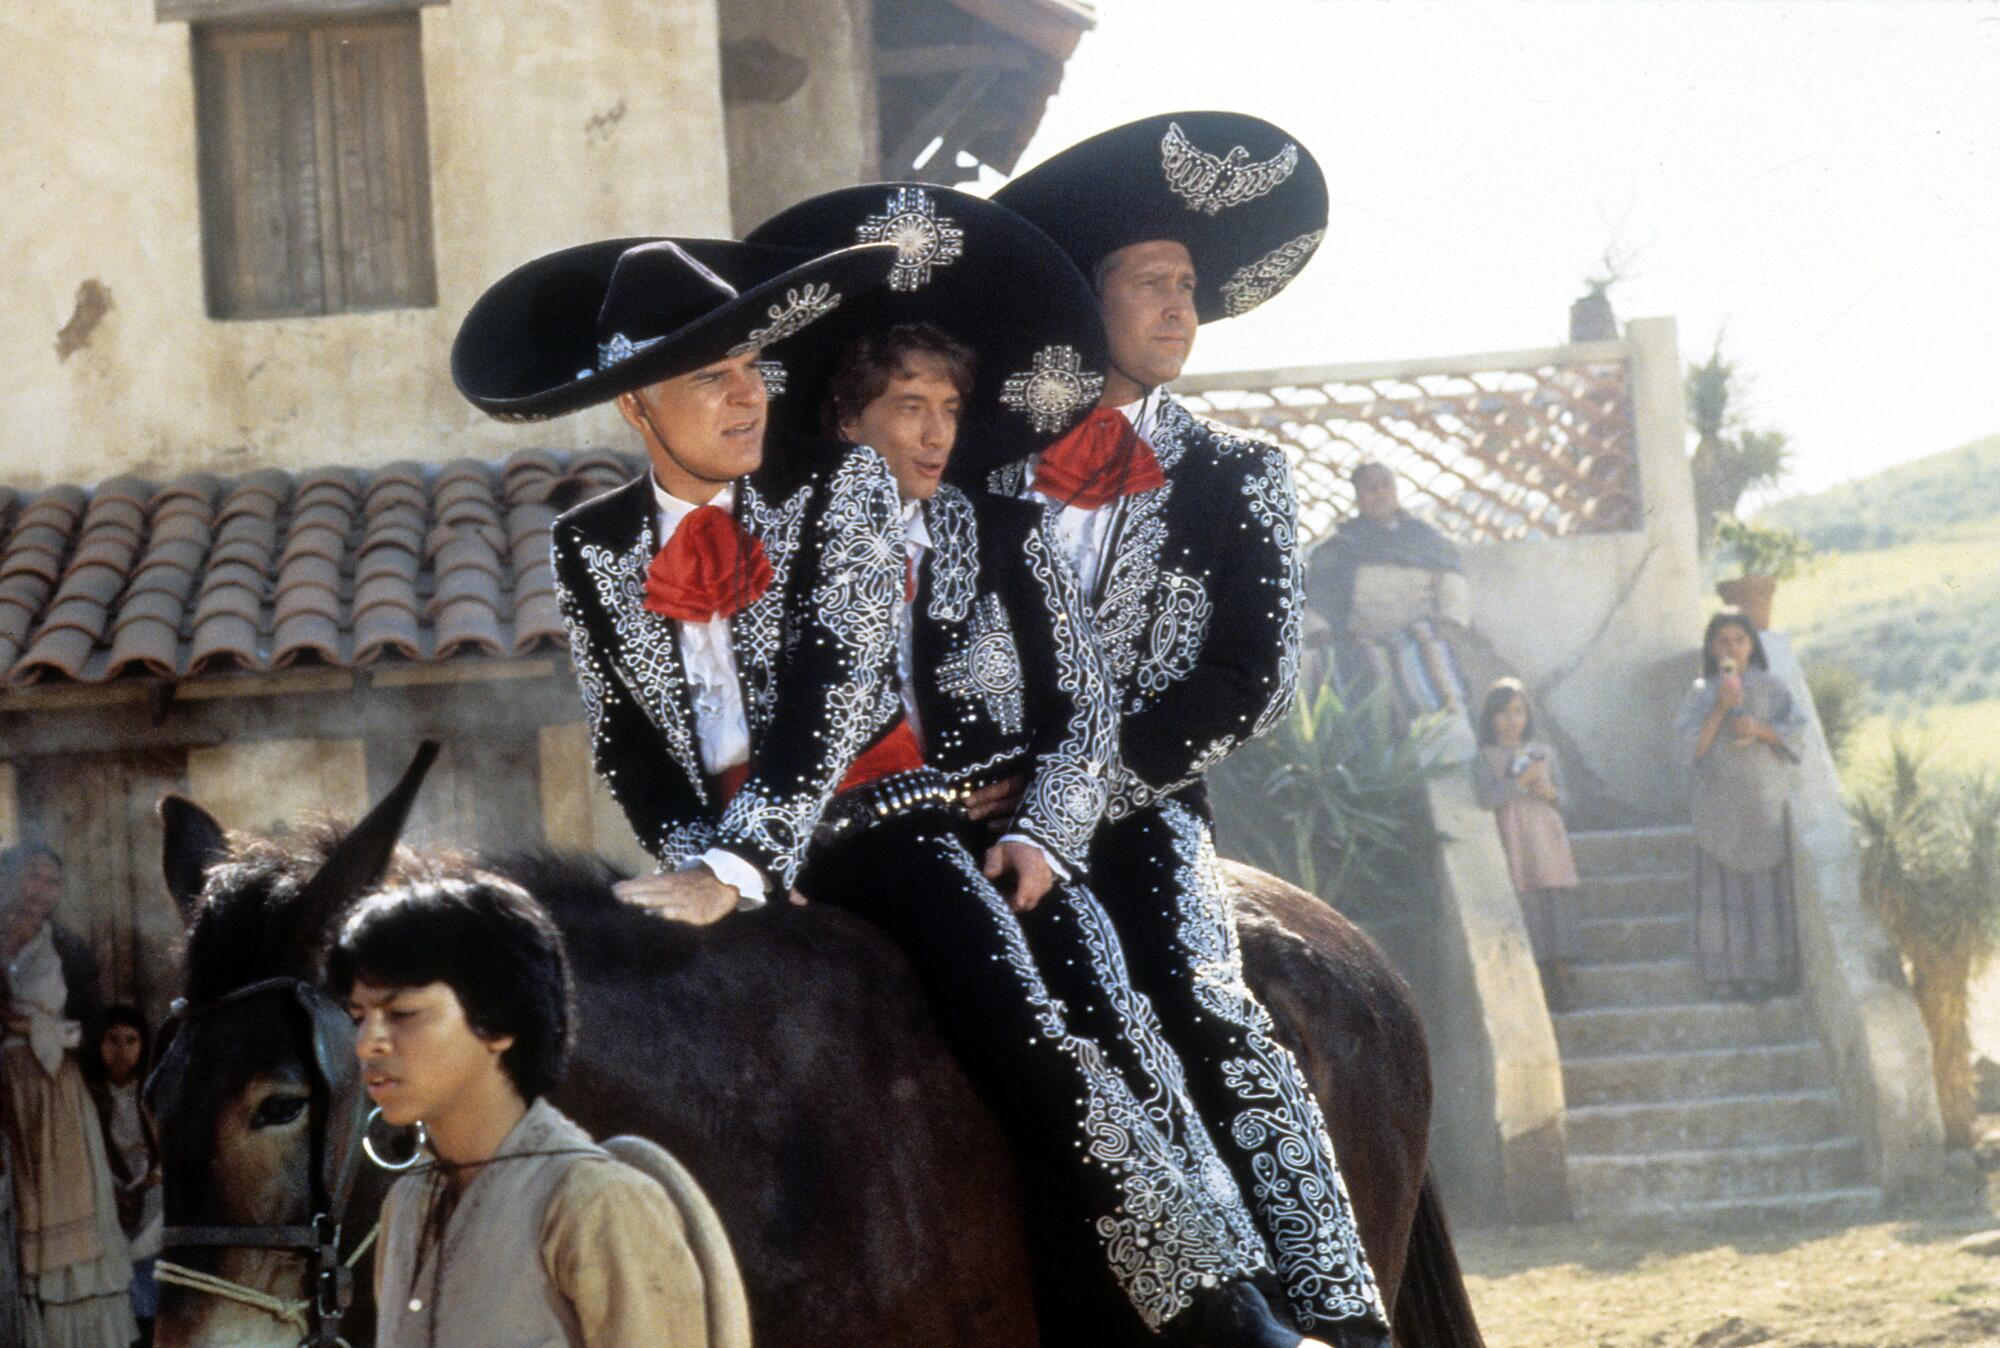 Three men dressed as mariachi performers ride a single horse in a scene from the 1986 film '¡Three Amigos!'